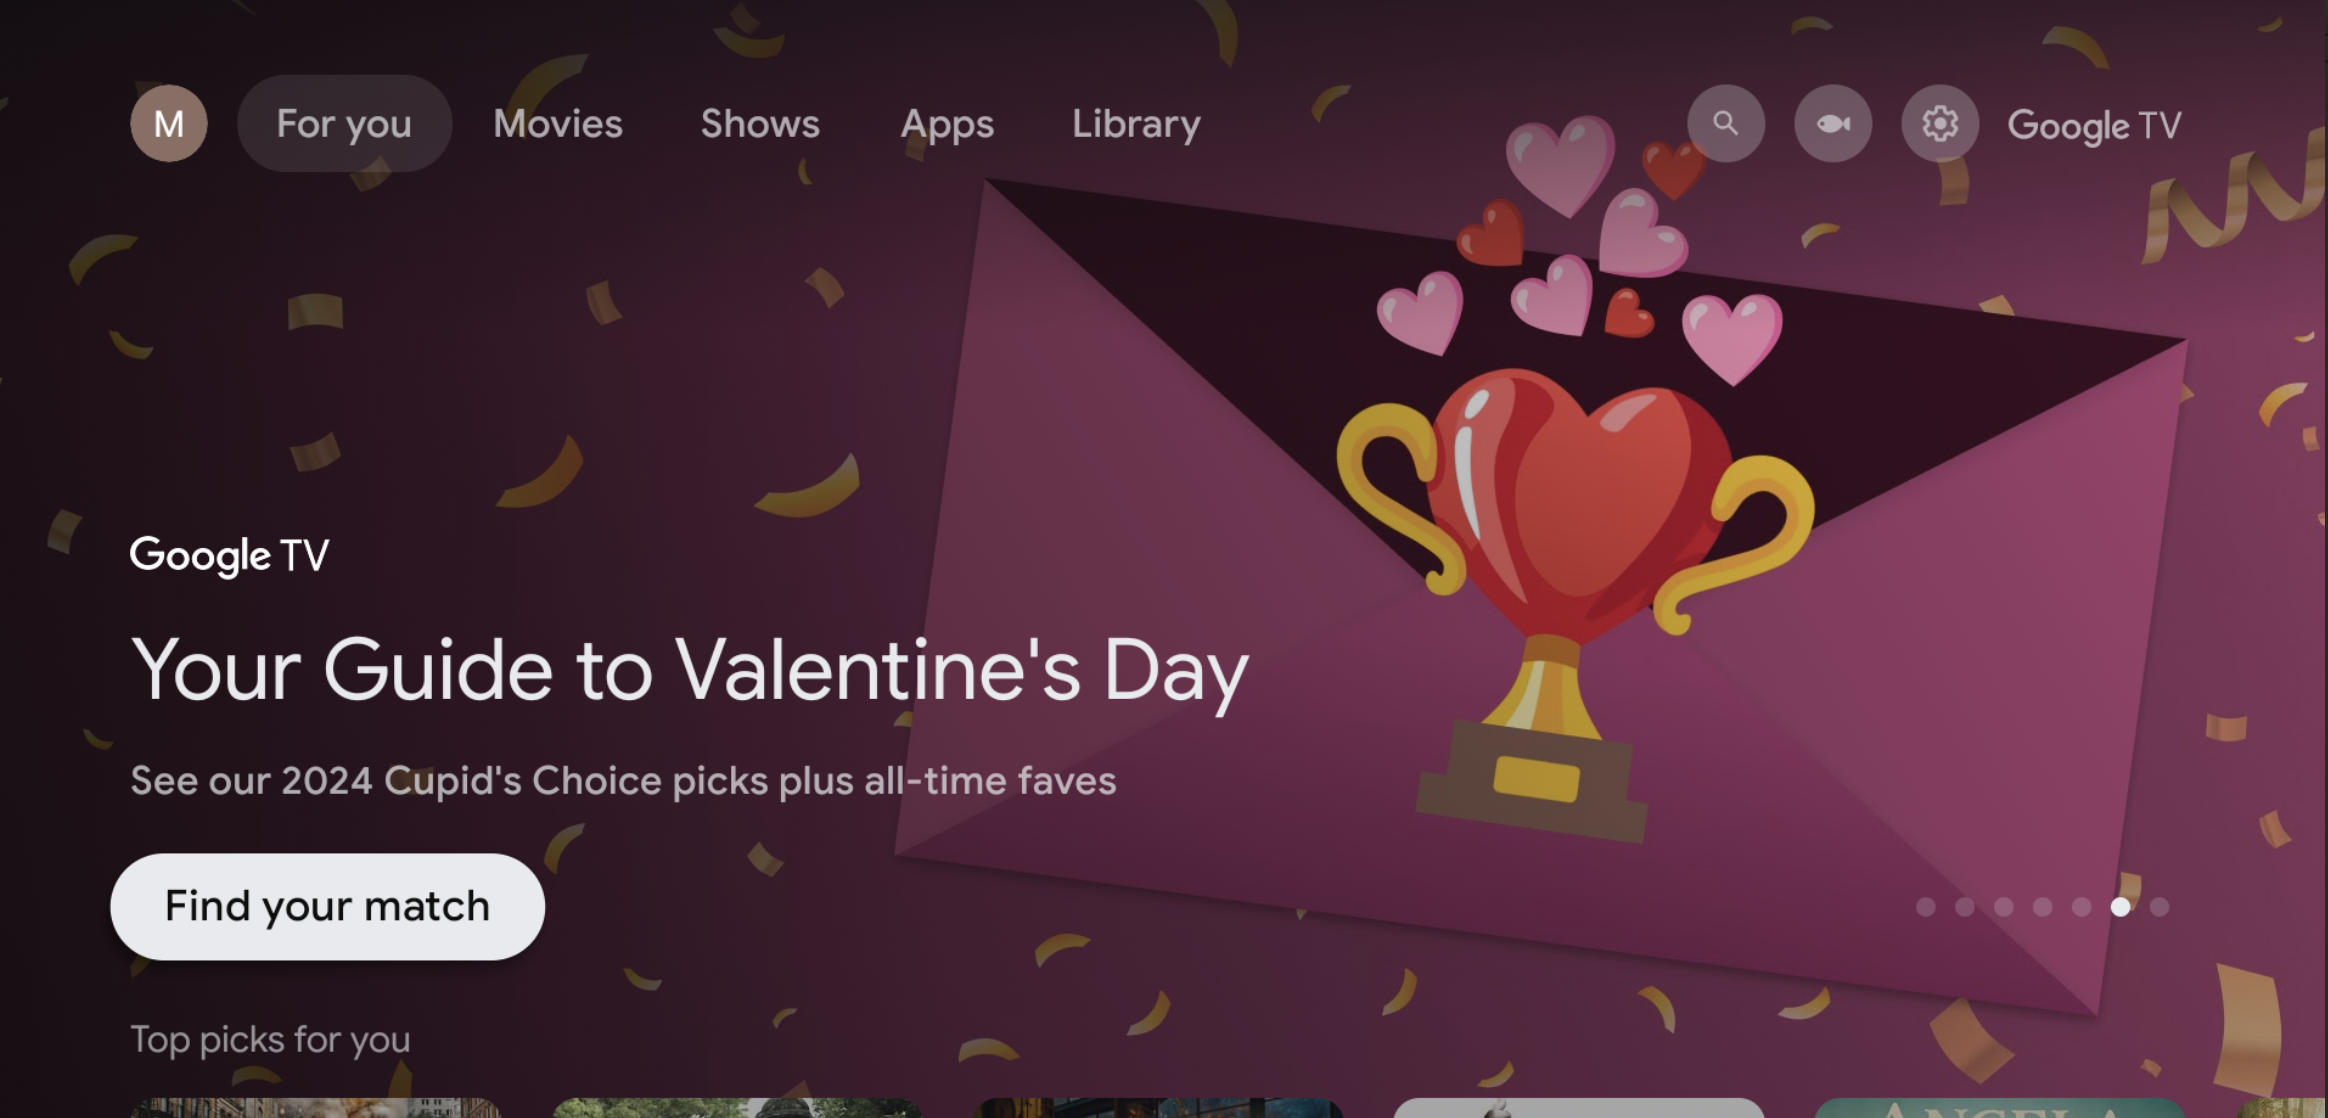 Google TV Adds Valentine’s Day Collections And a Special Screening of an Upcoming Film